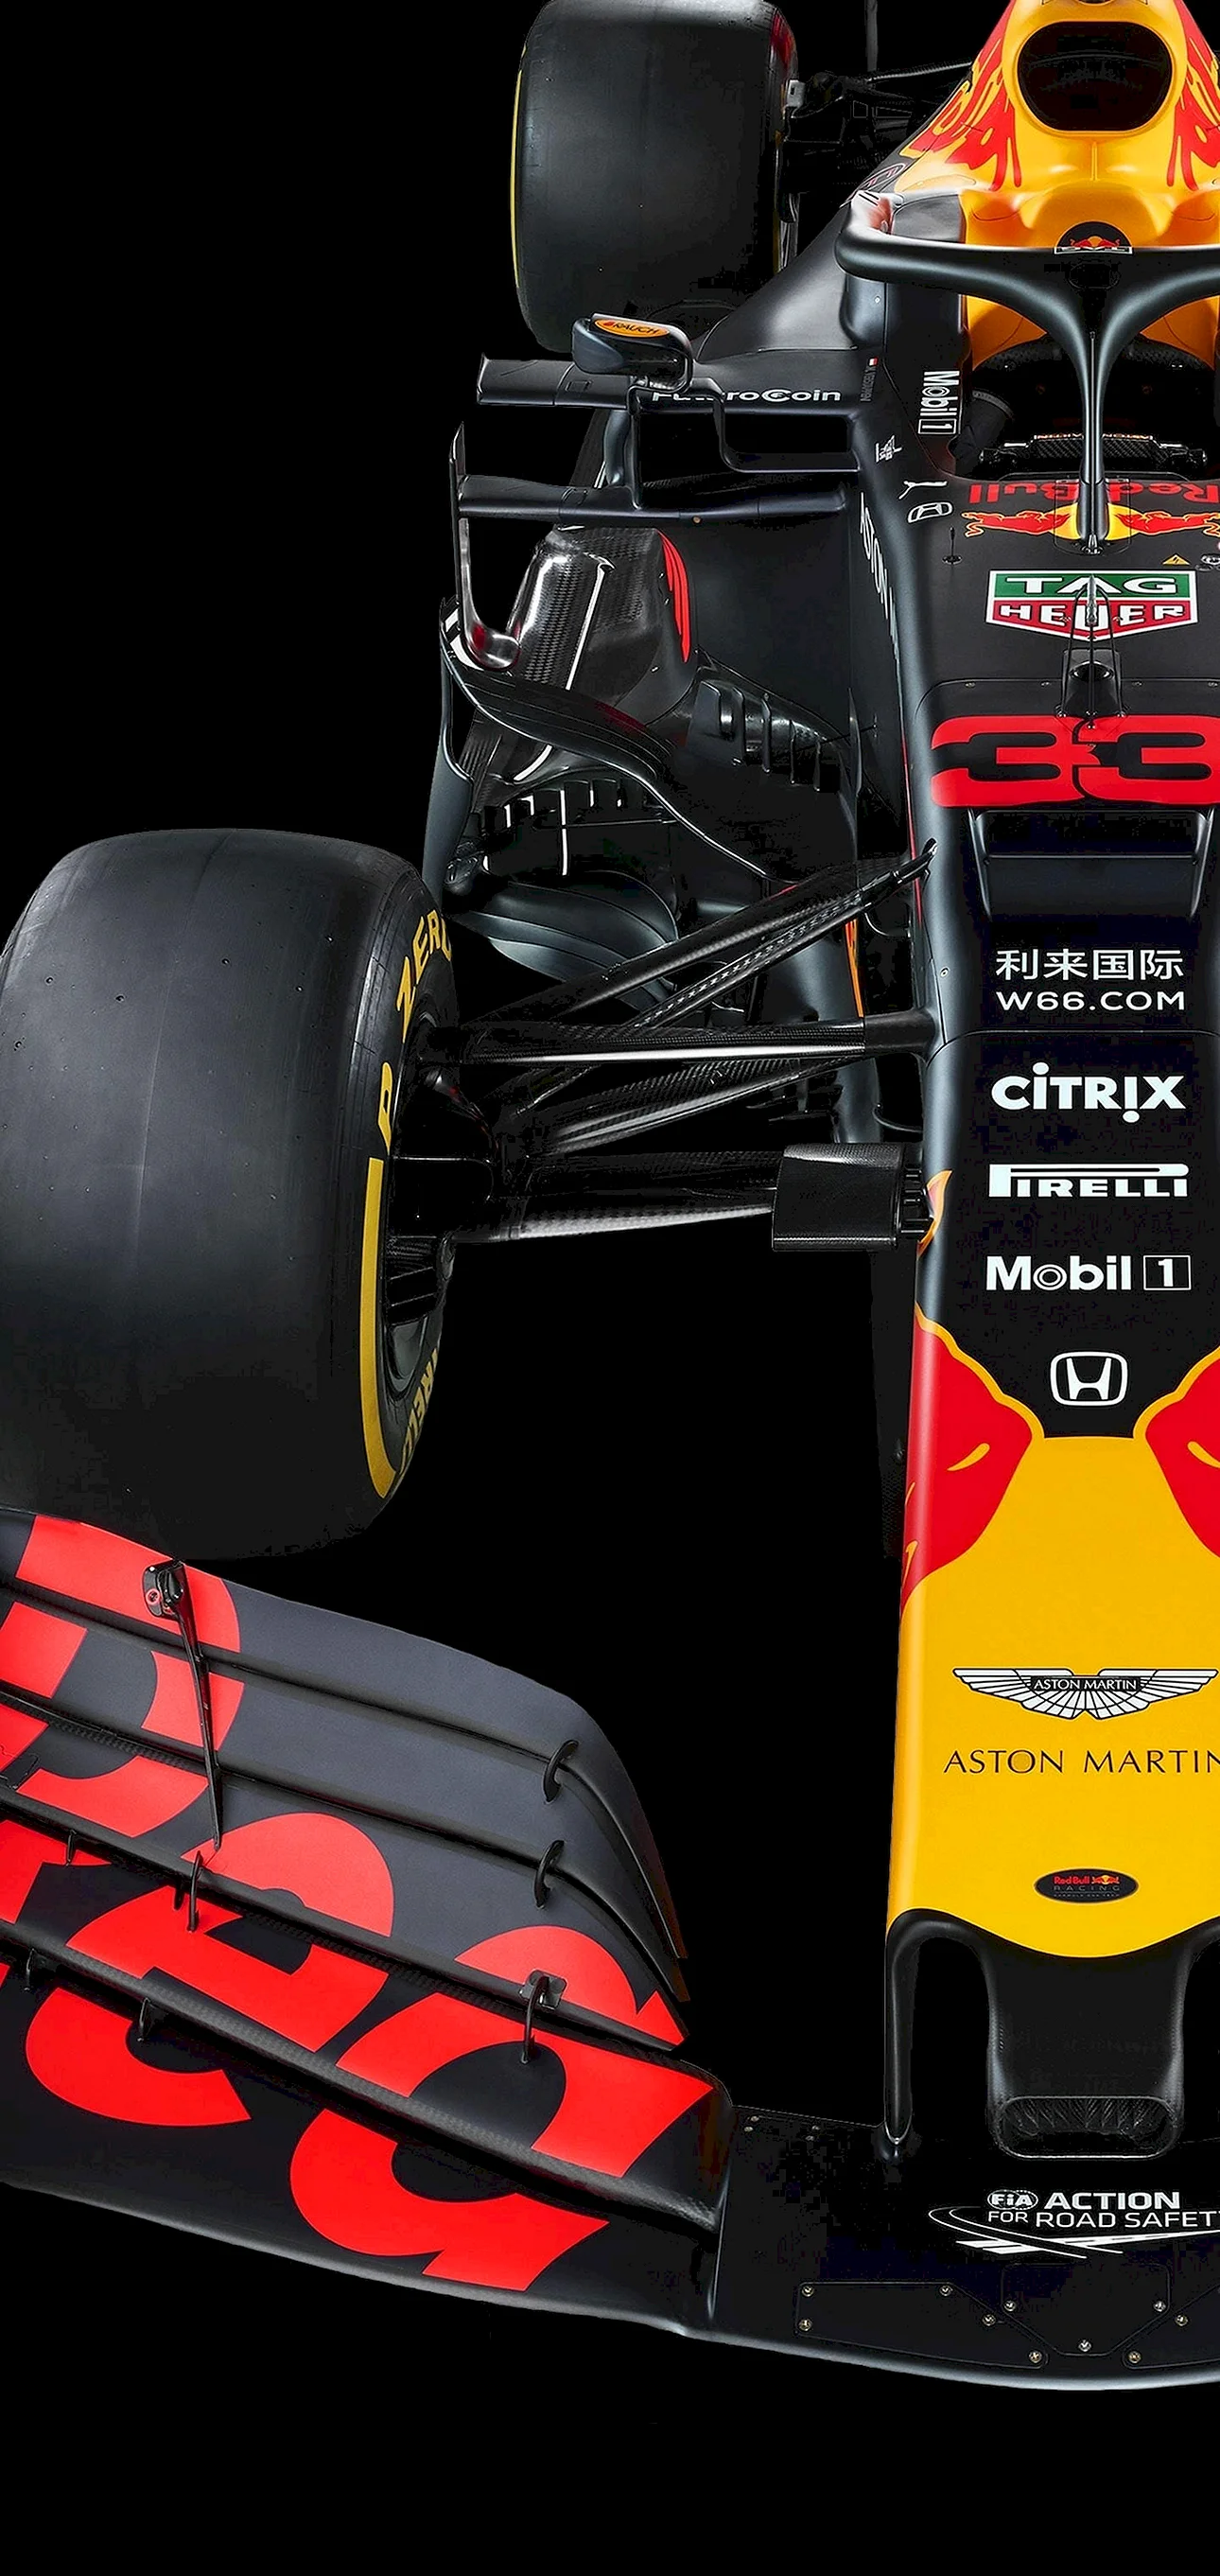 Red Bull Racing F1 Wallpaper For iPhone